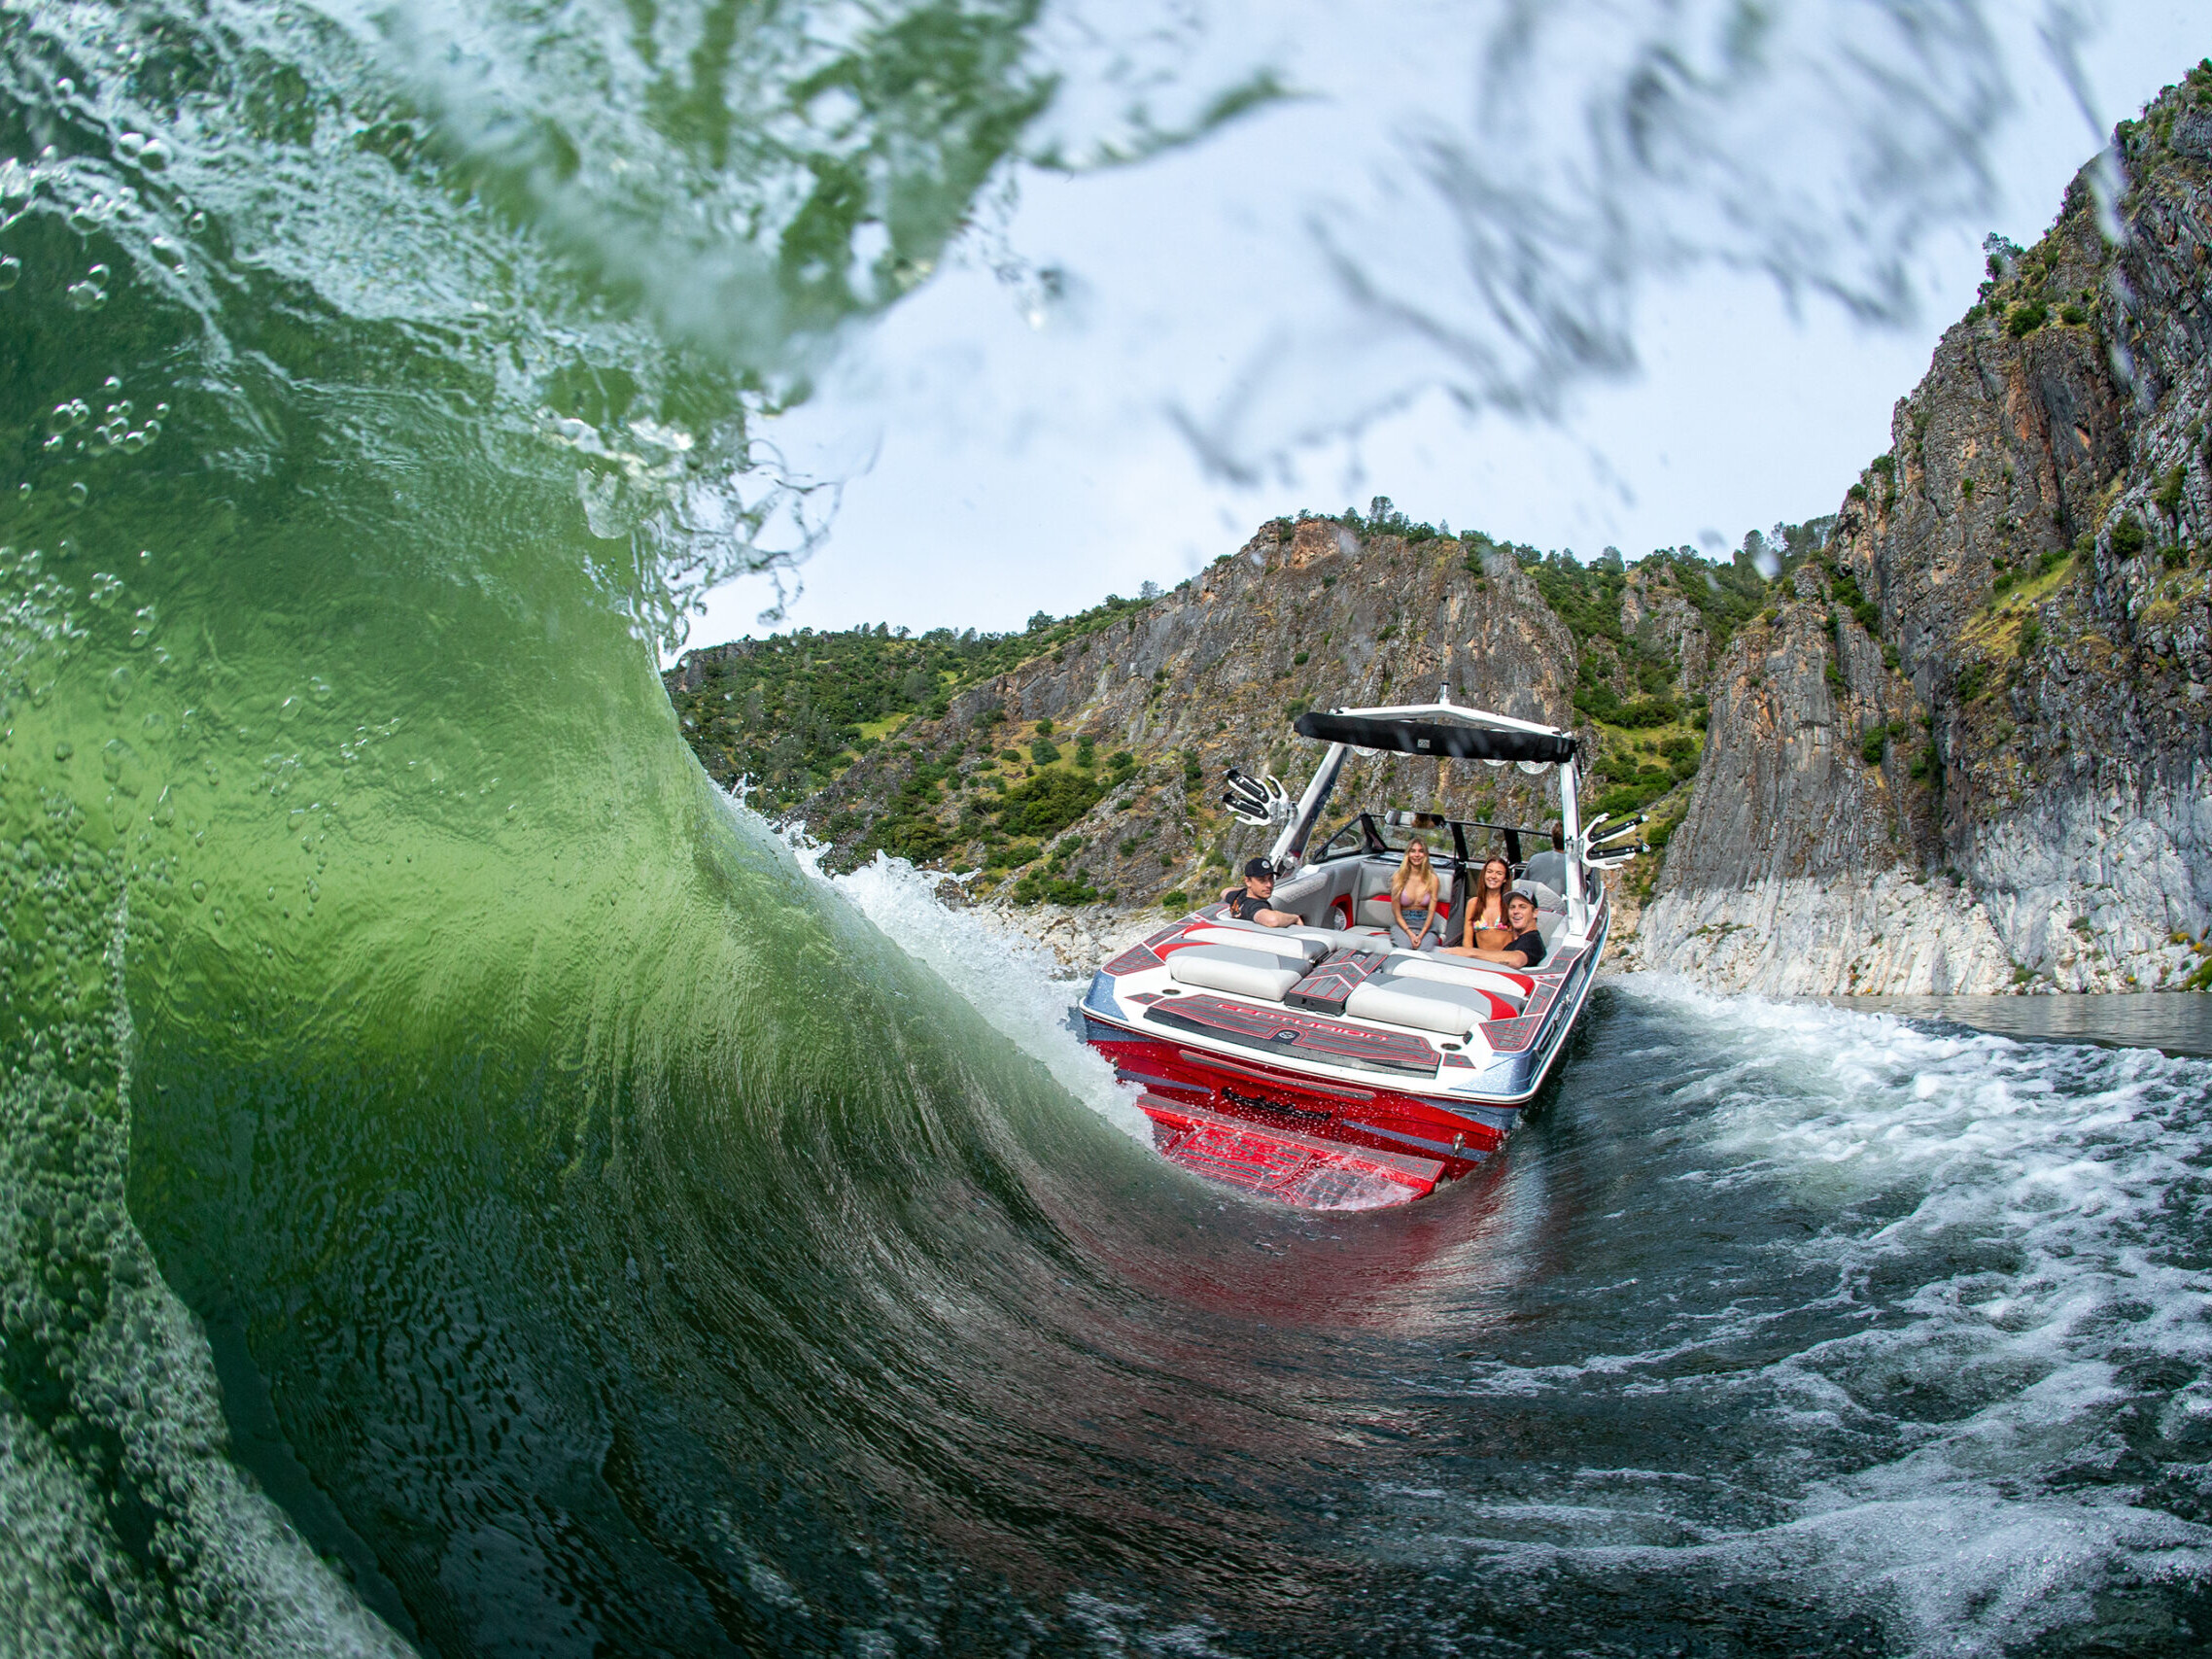 Surfers compete as their boat navigates through a massive wave, thrilling fans.